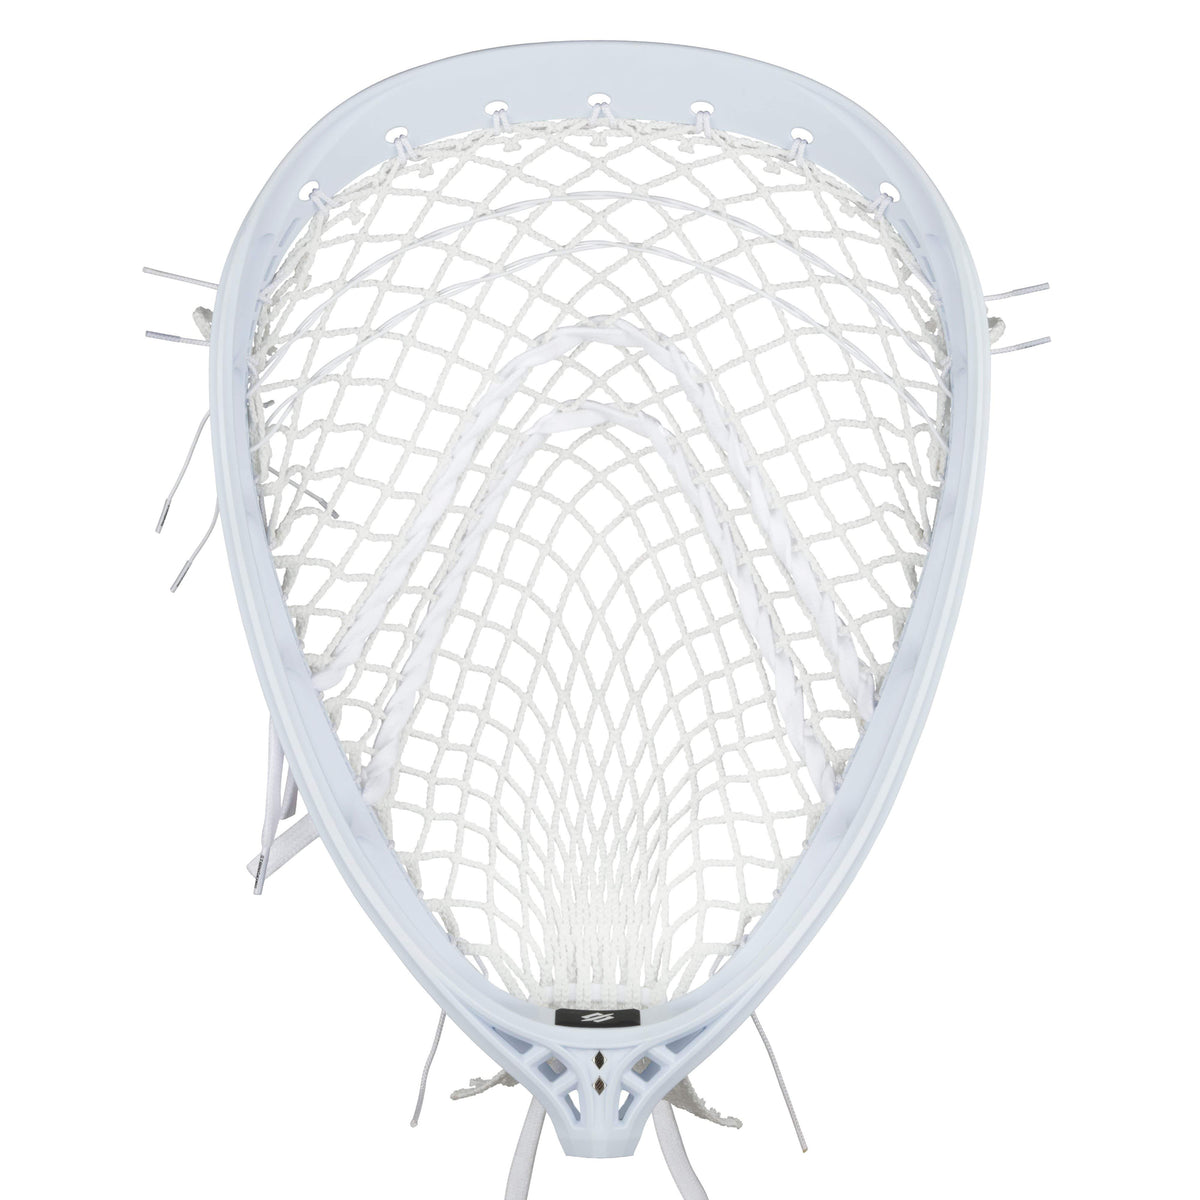 StringKing Mark 2G Goalie Strung Grizzly 2 Lacrosse Head